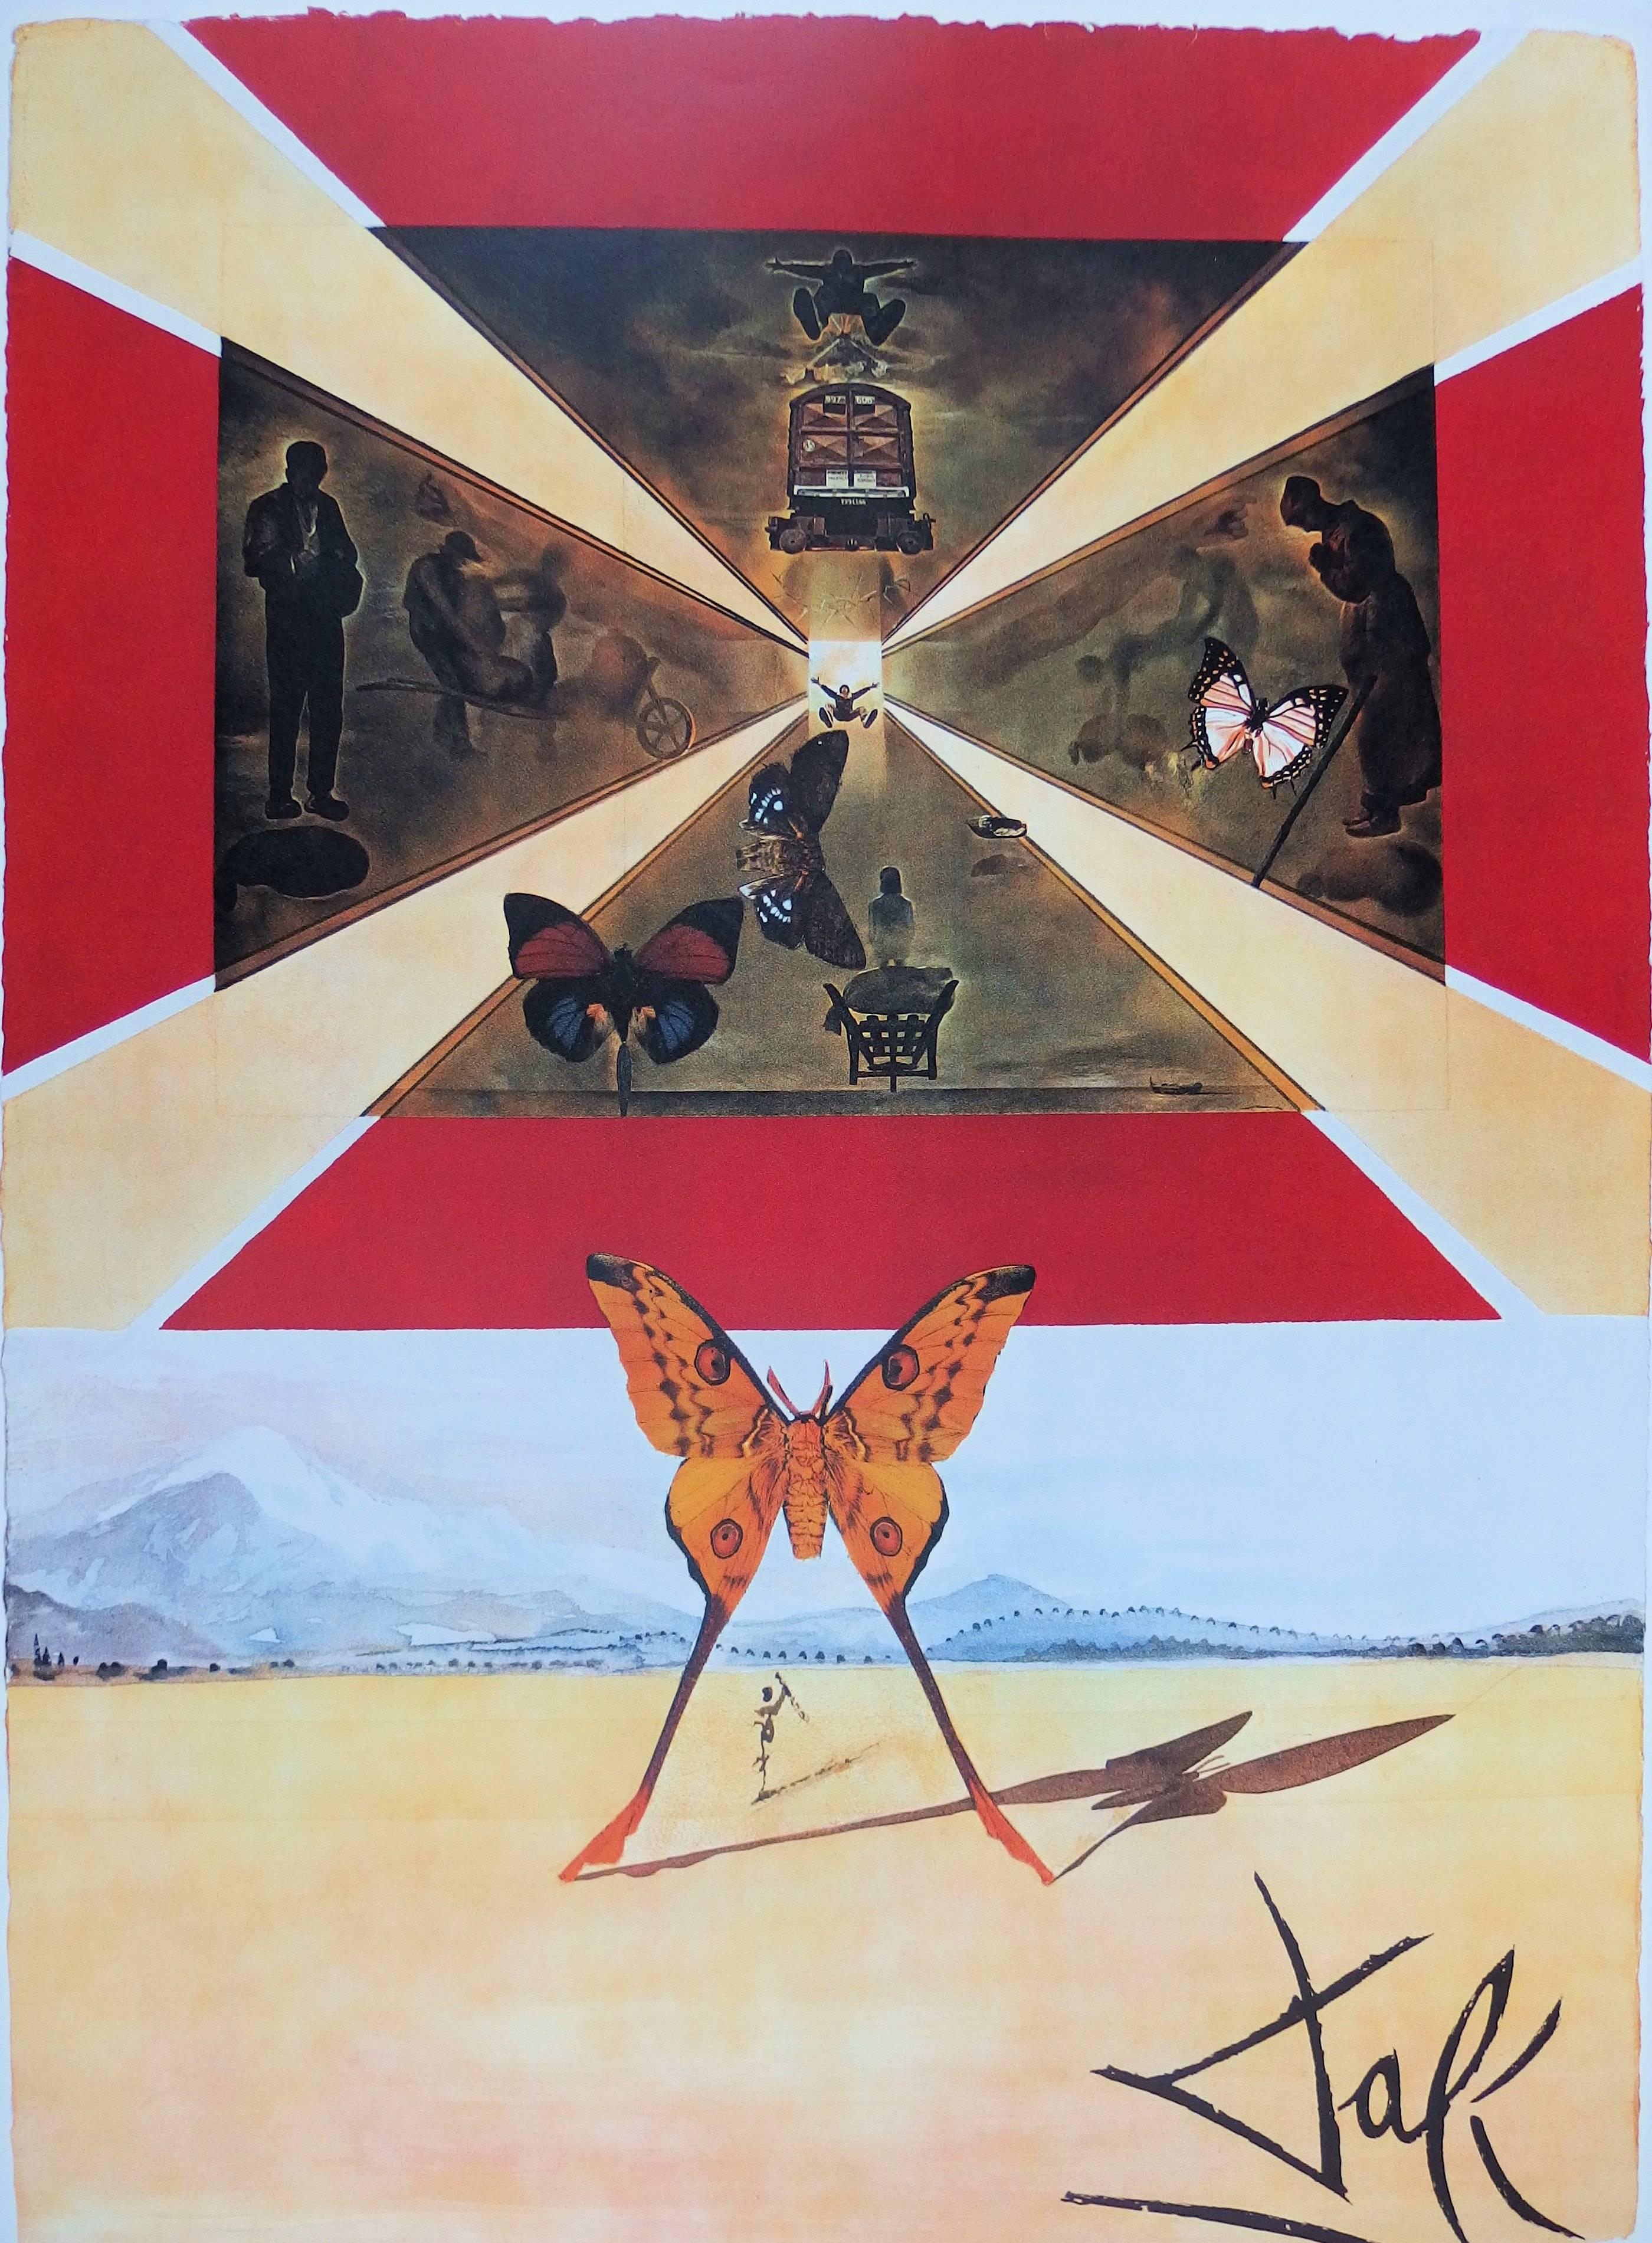 Butterfly suite : Roussillon - Original lithograph - Tall size, 1969 - Surrealist Print by (after) Salvador Dali